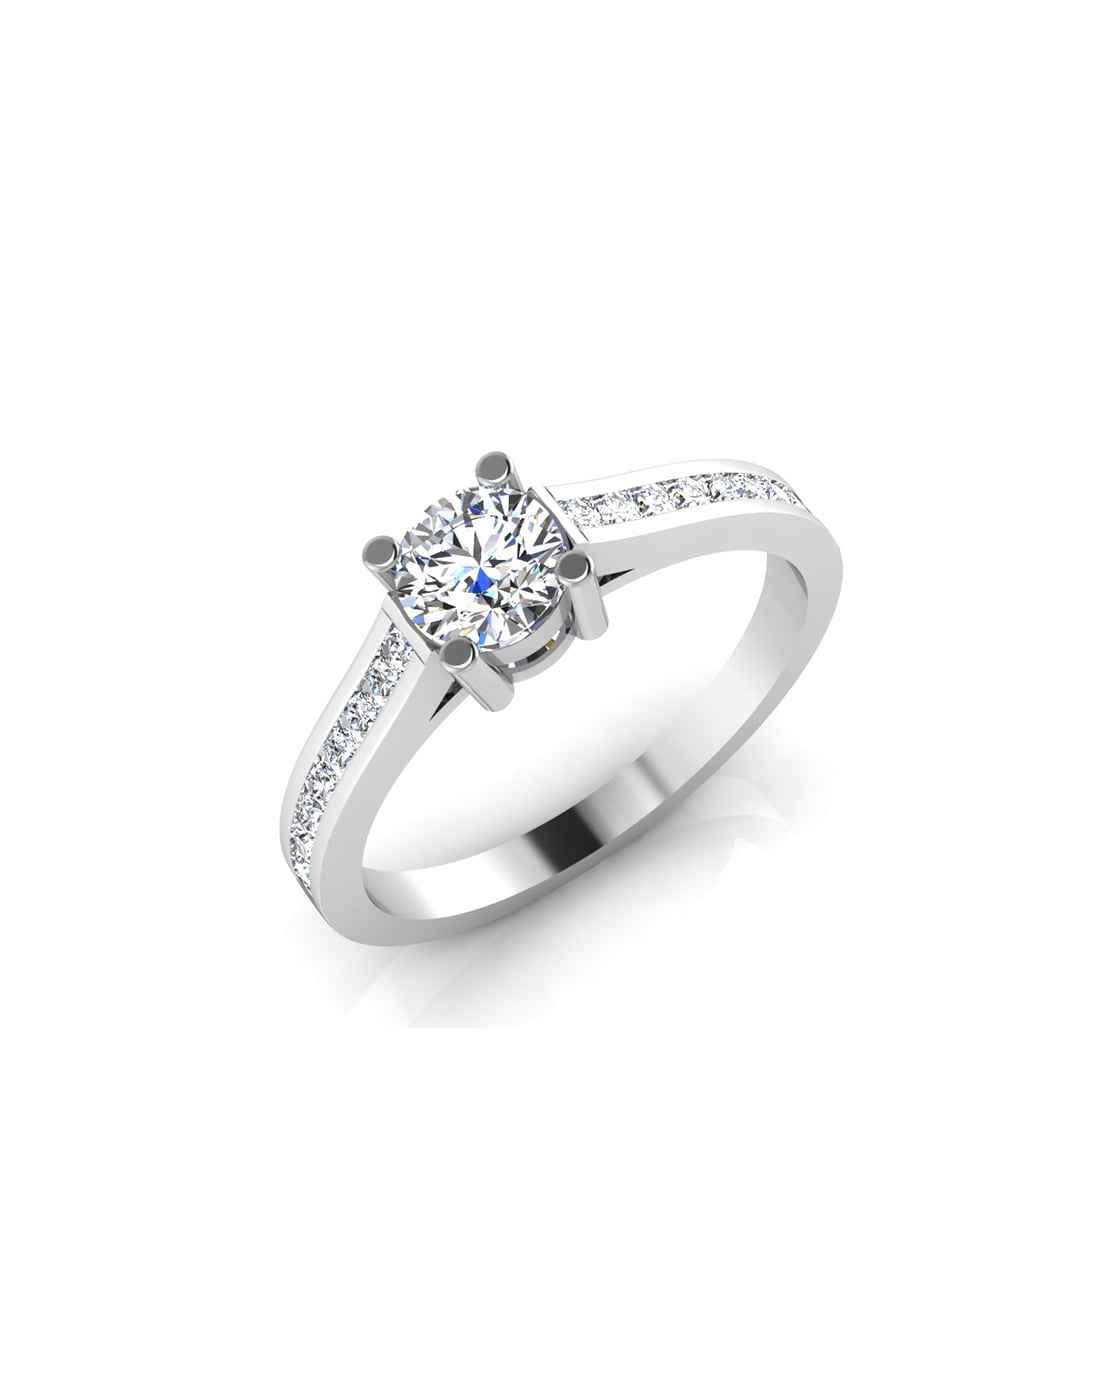 Buy CaratLane 18k White Gold and Diamond Forever Ring at Amazon.in